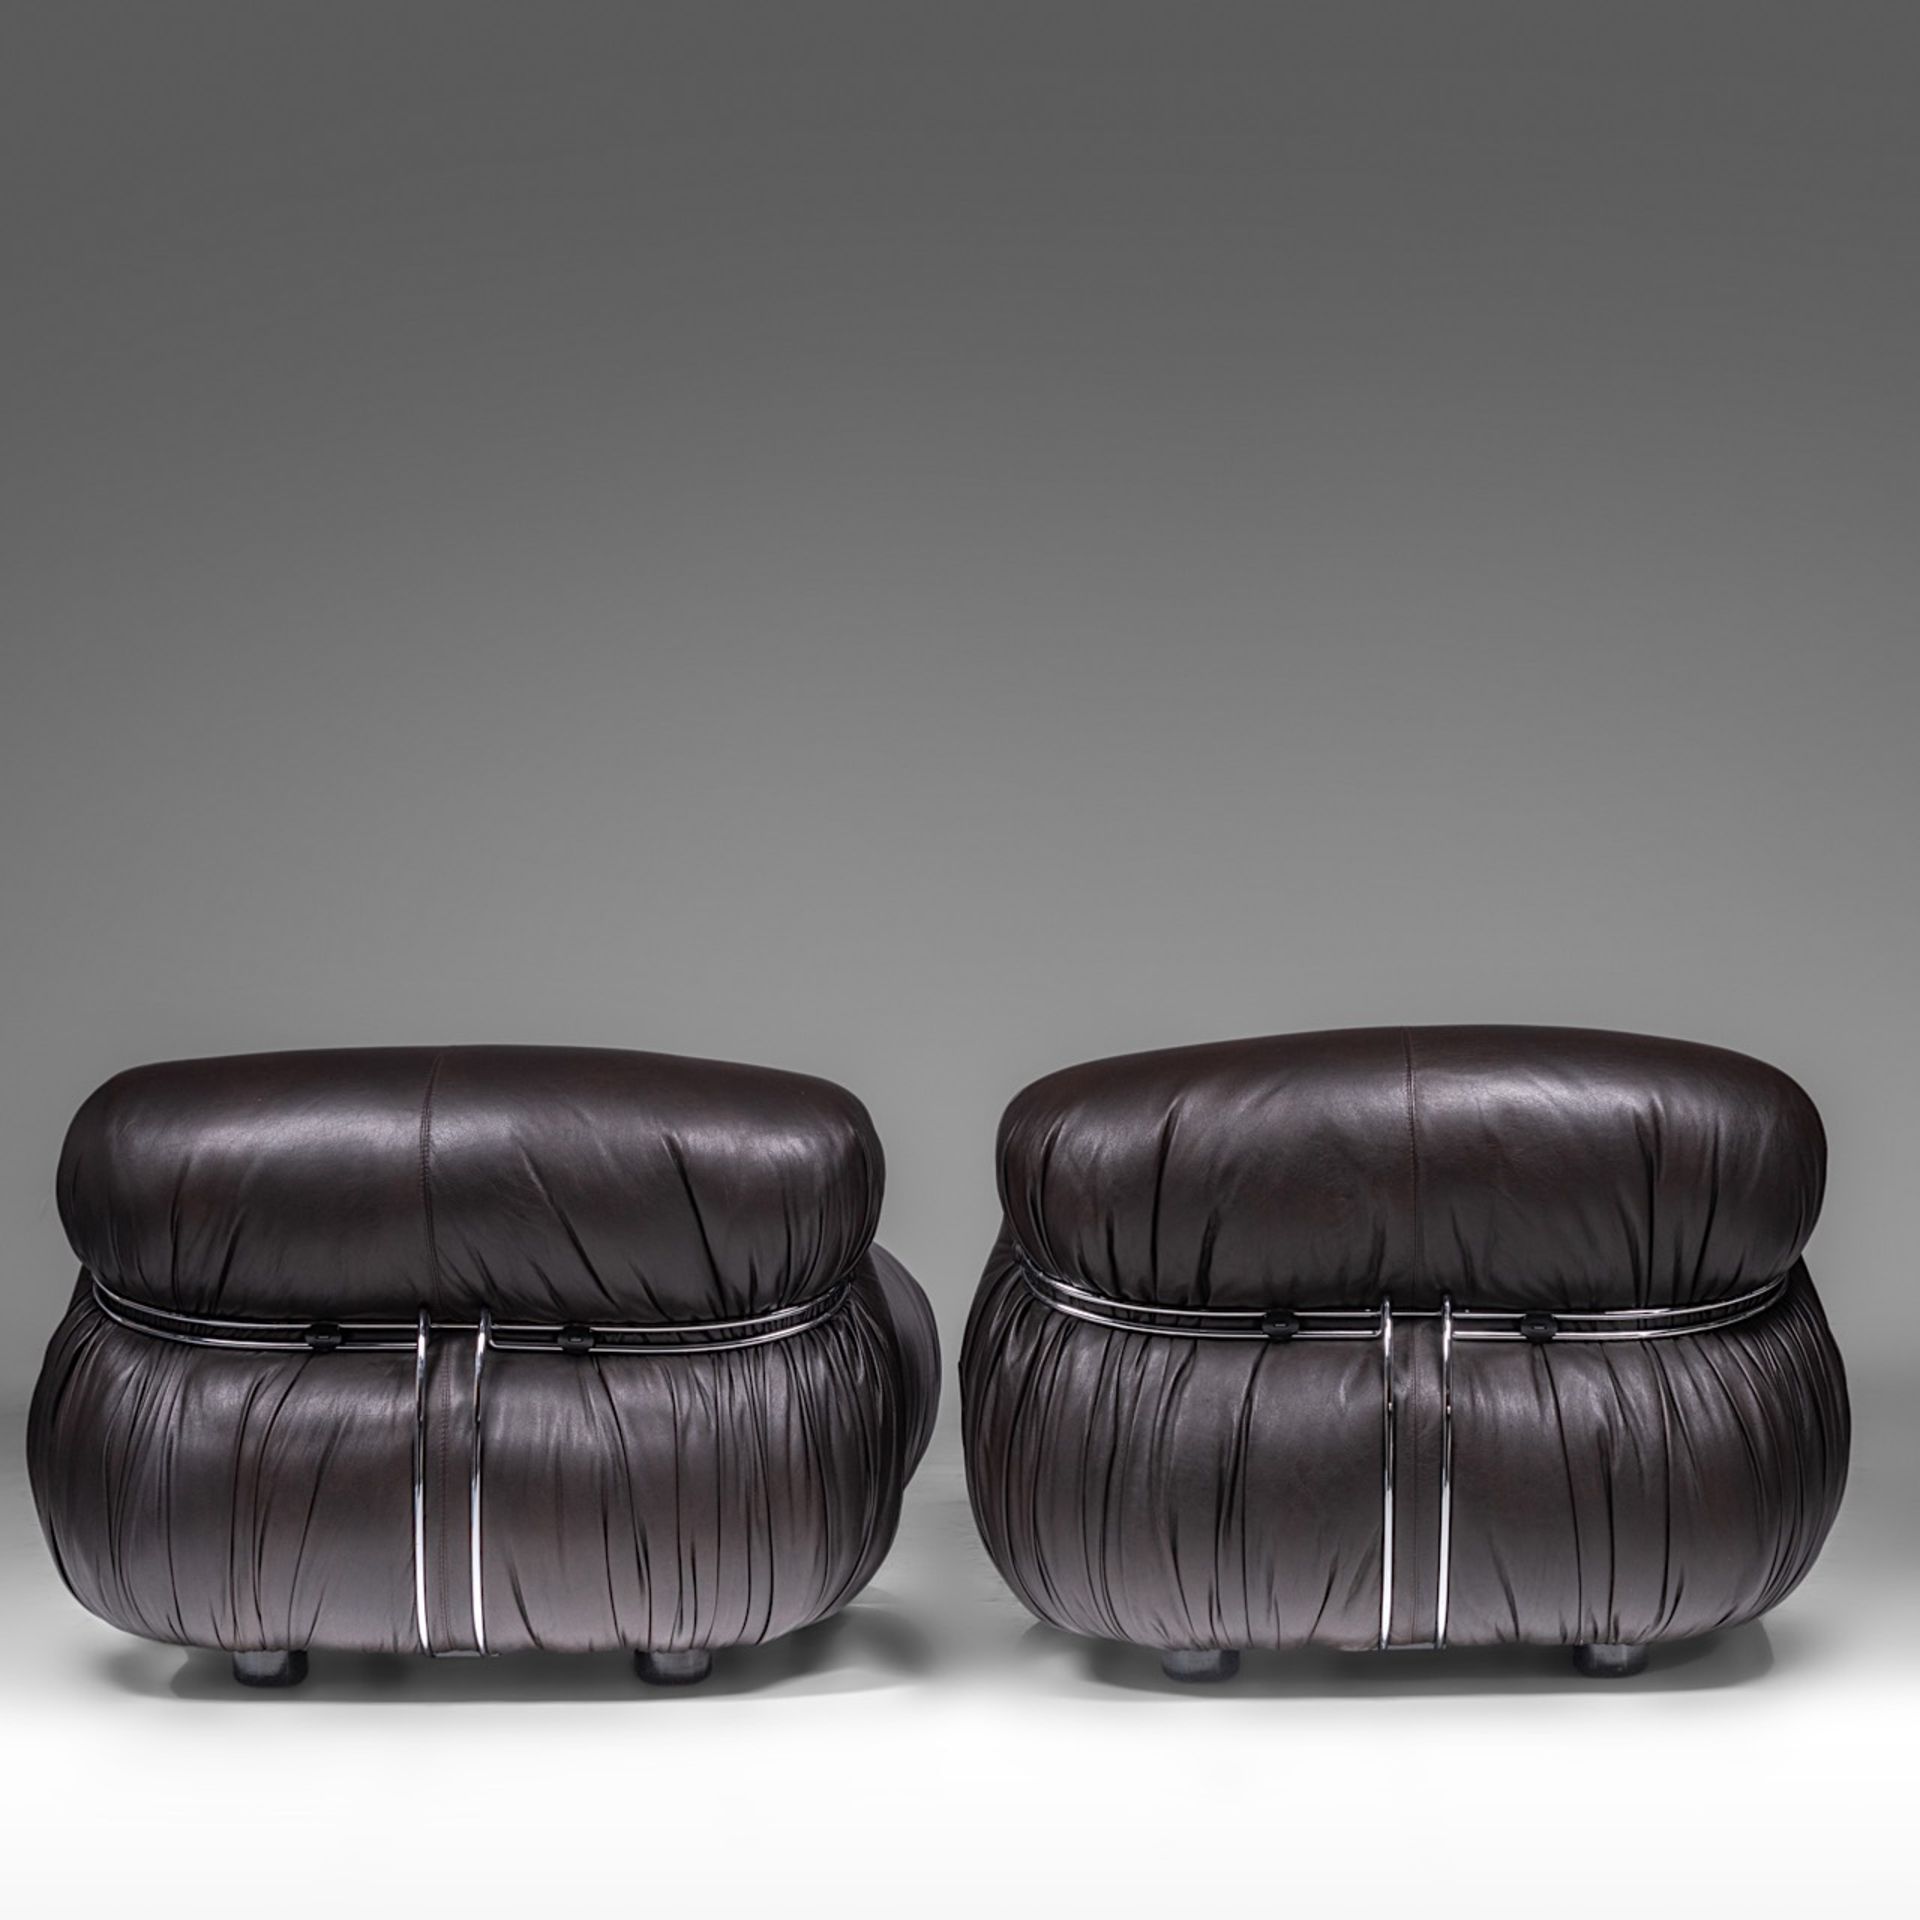 Two Soriana chaise-longues in brown leather and chrome by Afra & Tobia Scarpa for Cassina - Image 3 of 8